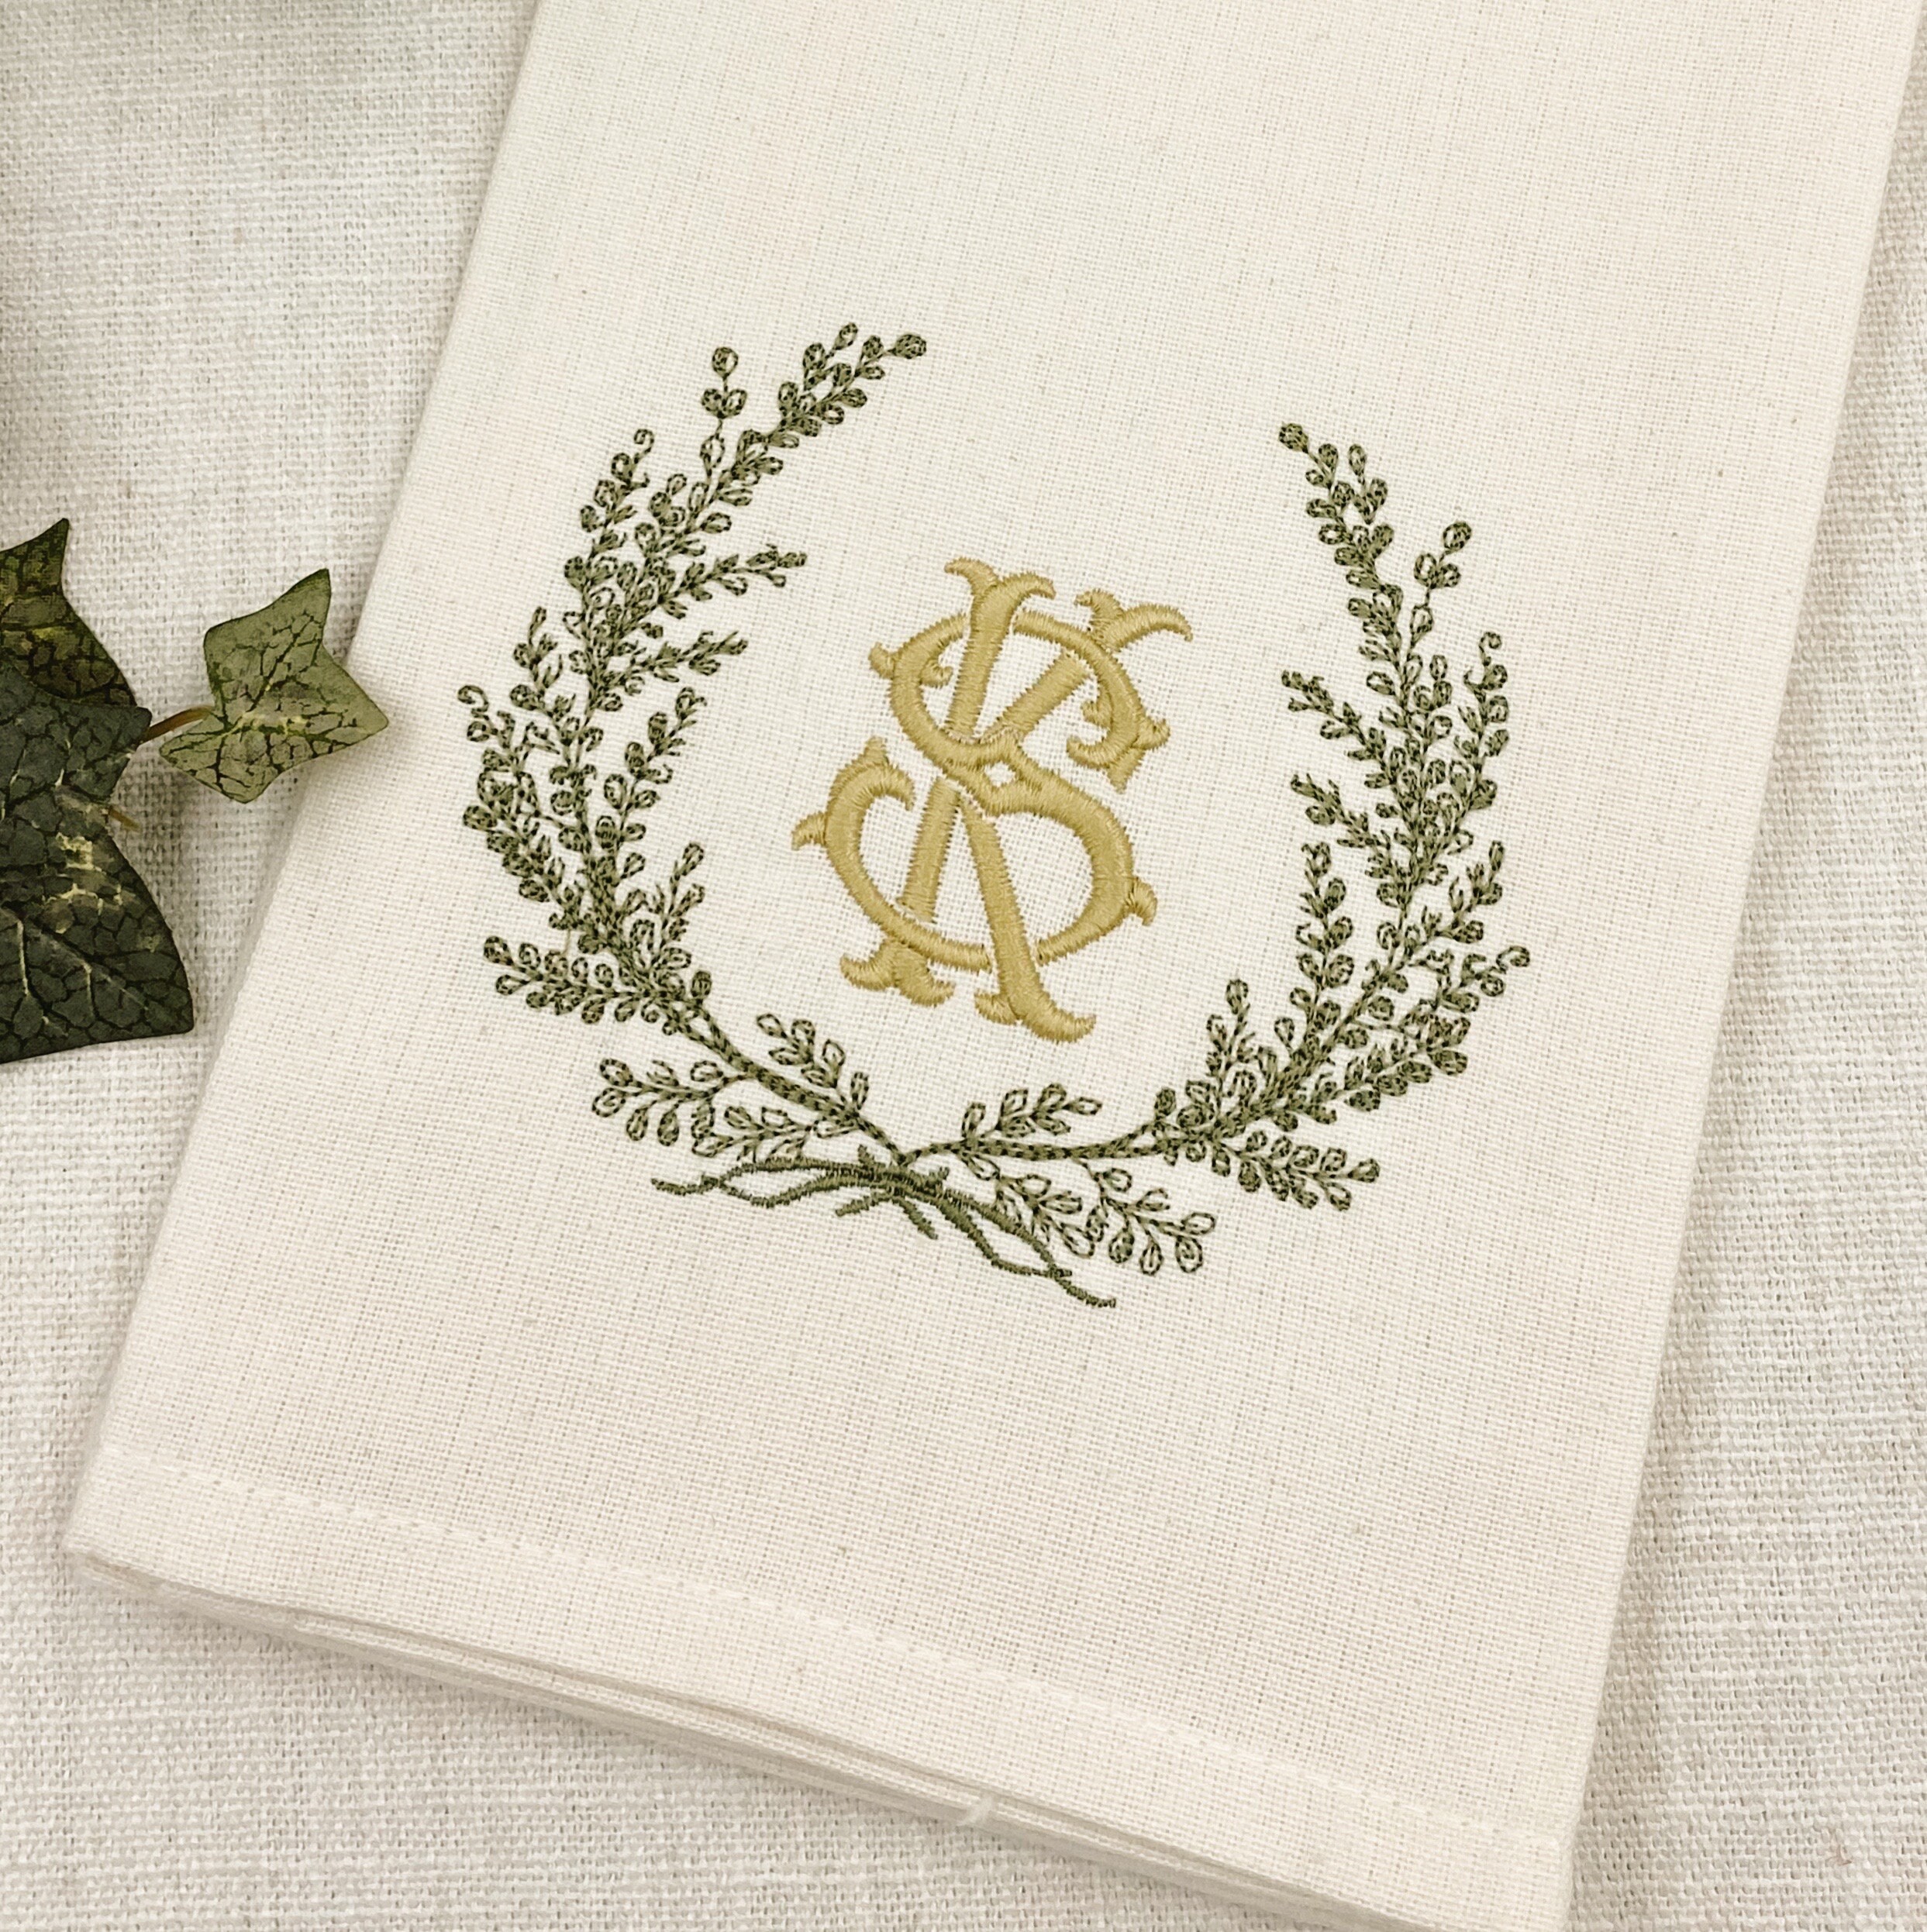 Personalized Kitchen Towels - Cotton- Embroidered - Choose your